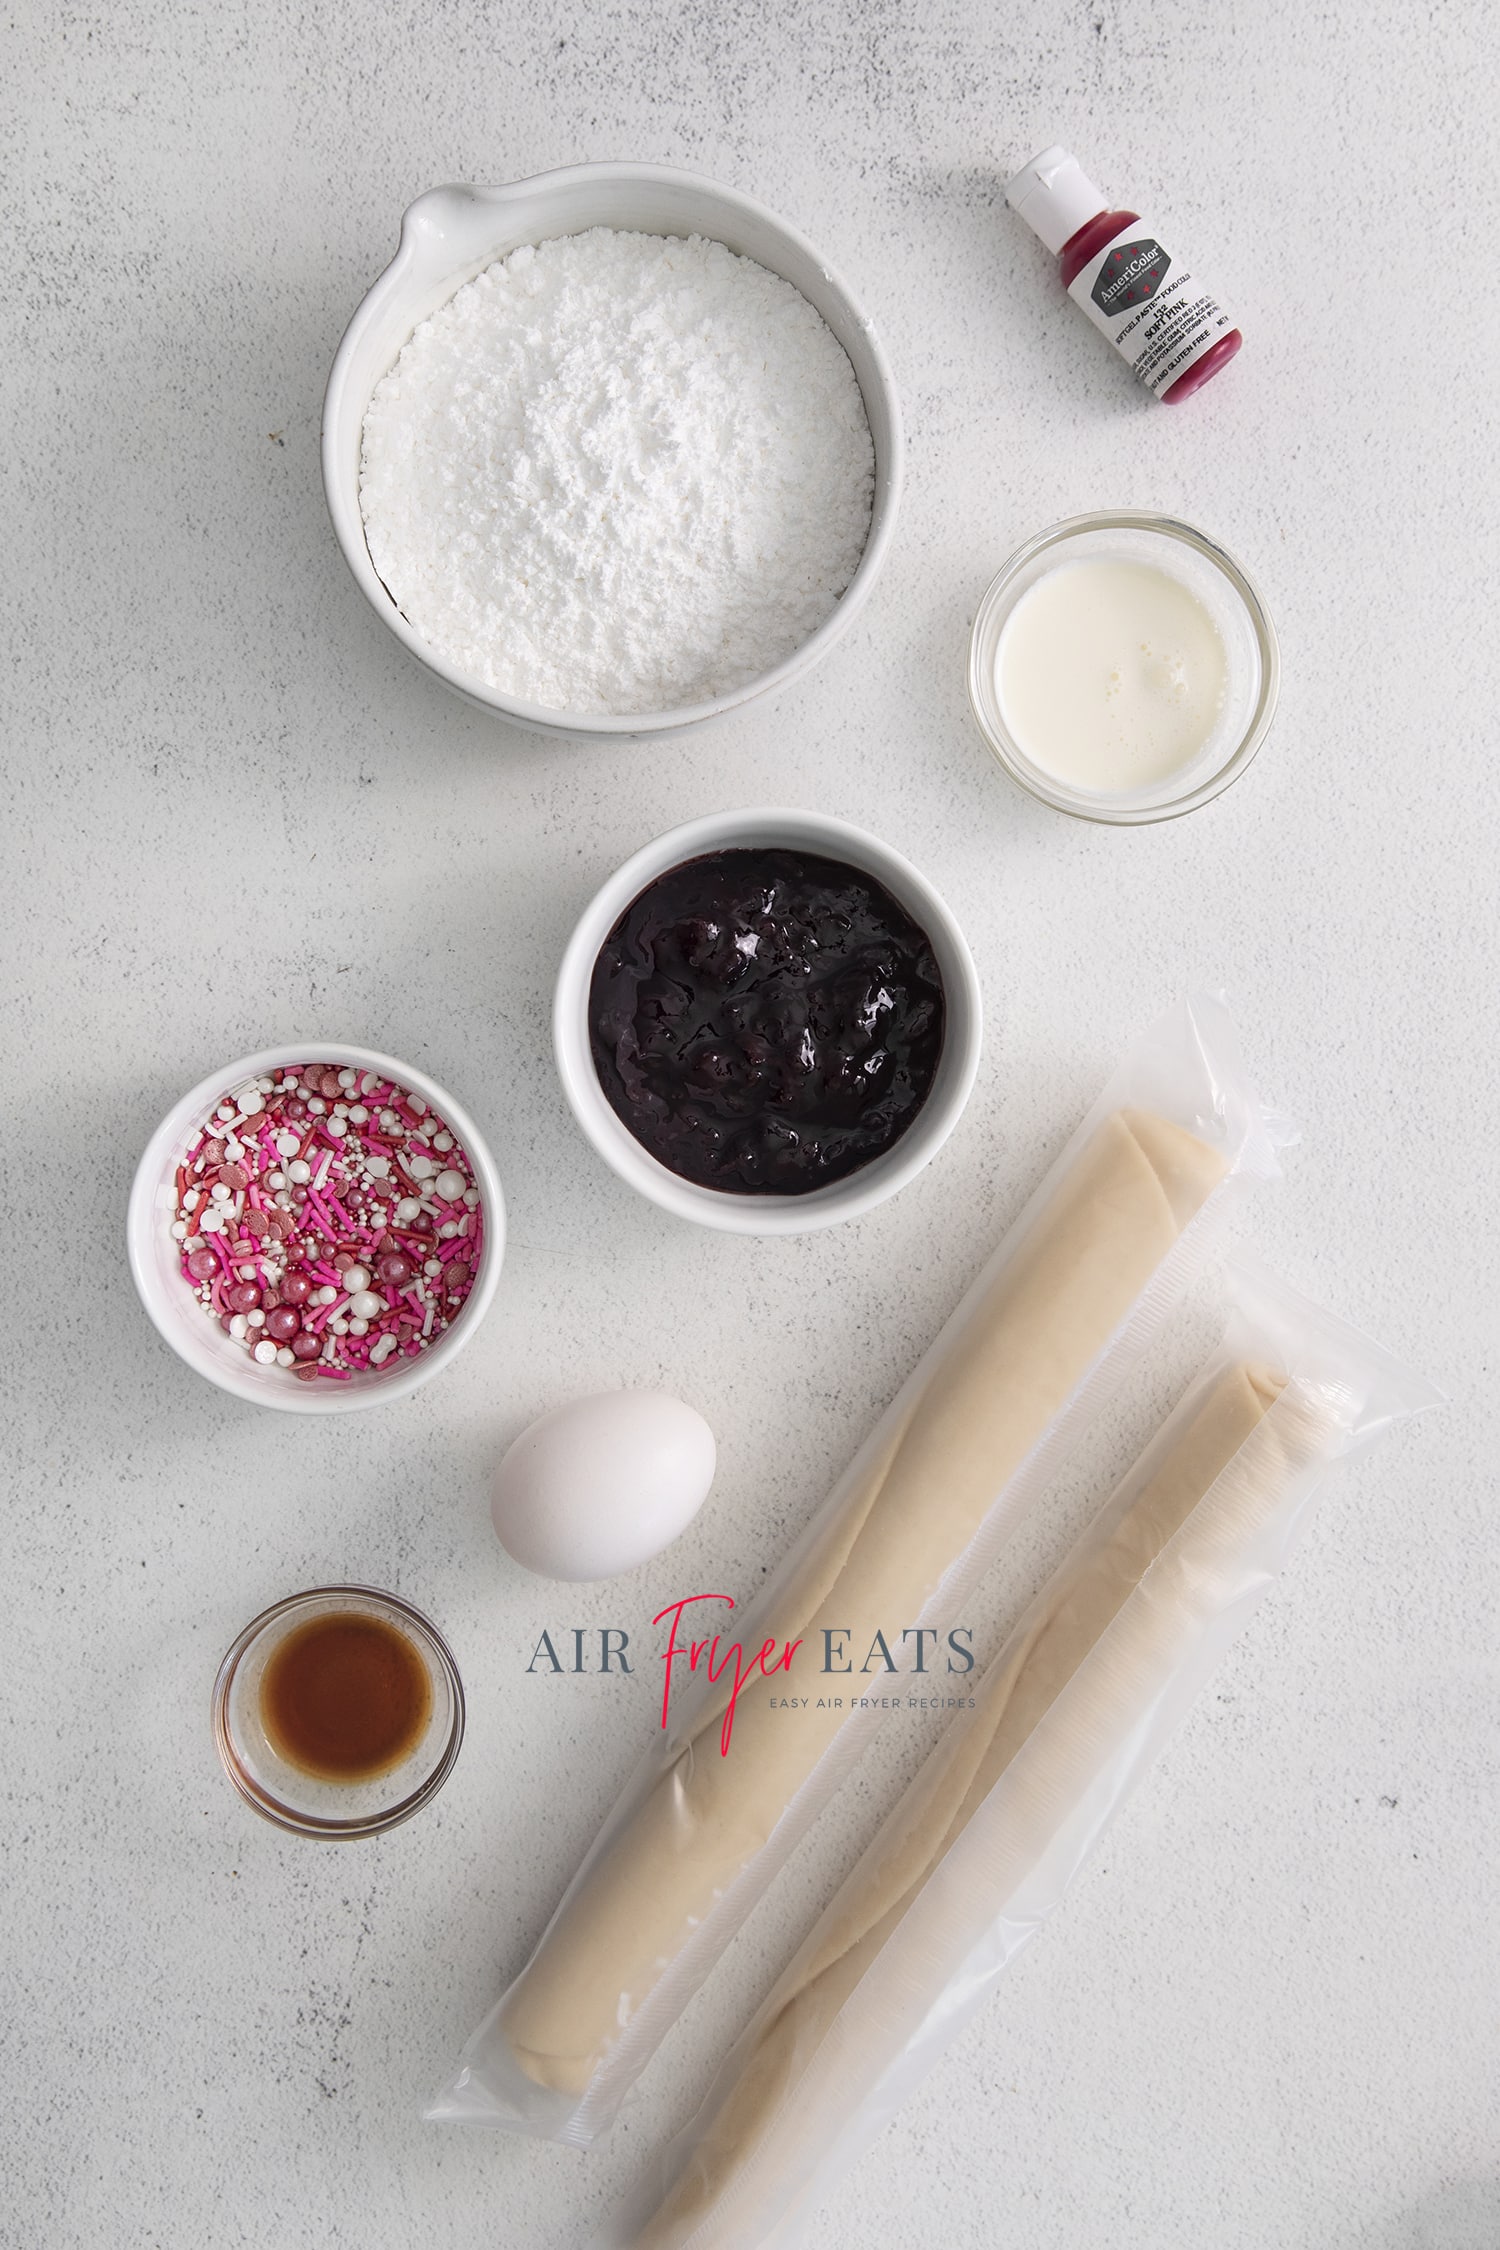 the ingredients needed to make air fryer poptarts from scratch, including pie dough and jam.